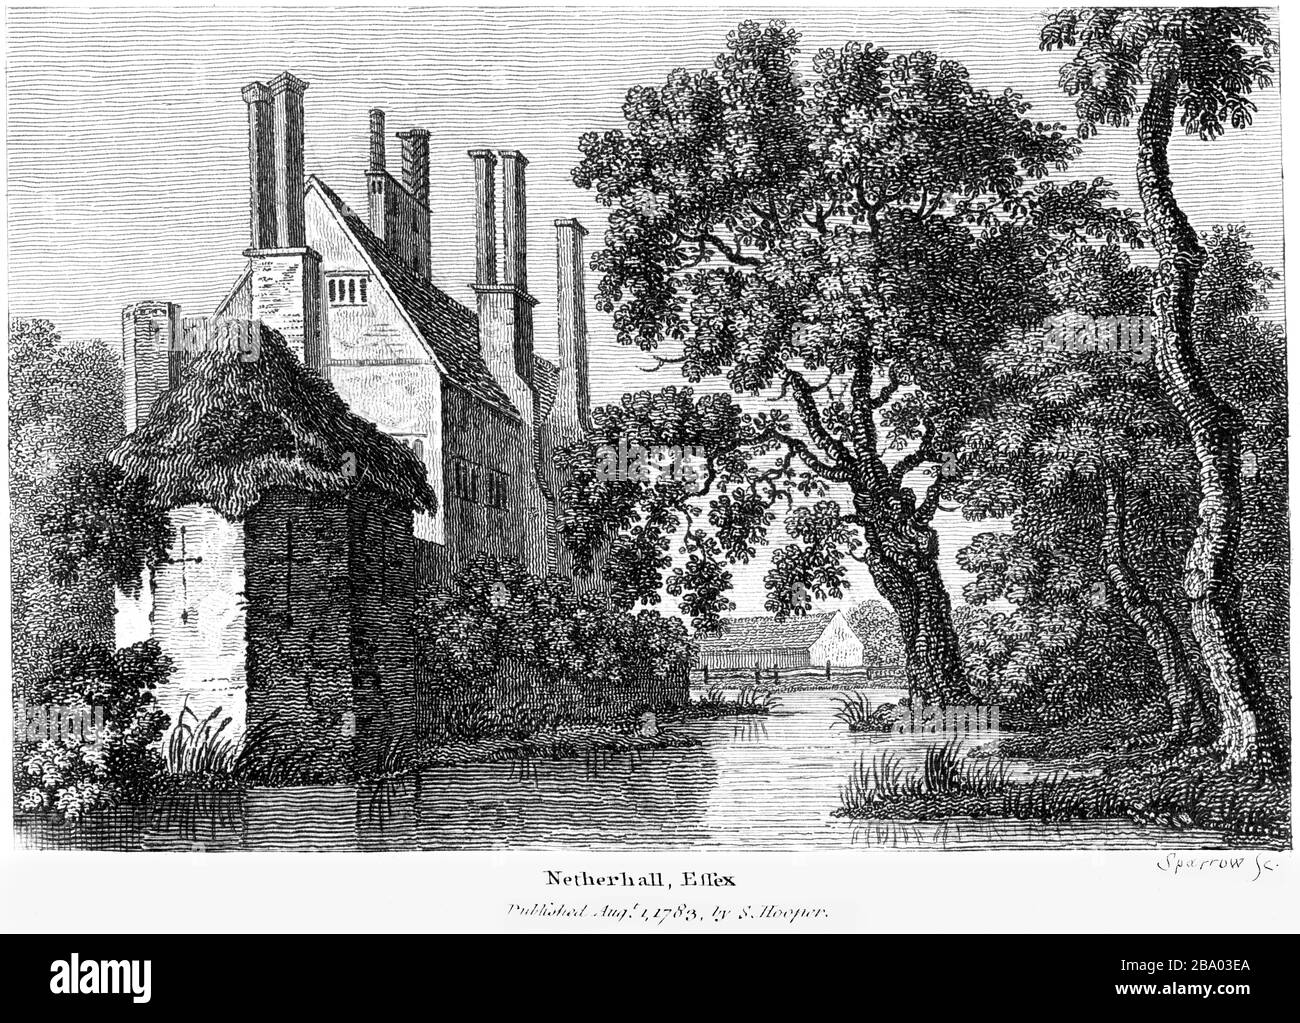 An engraving of Netherhall (Nether Hall) Essex 1783 scanned at high resolution from a book published around 1786. Believed copyright free. Stock Photo